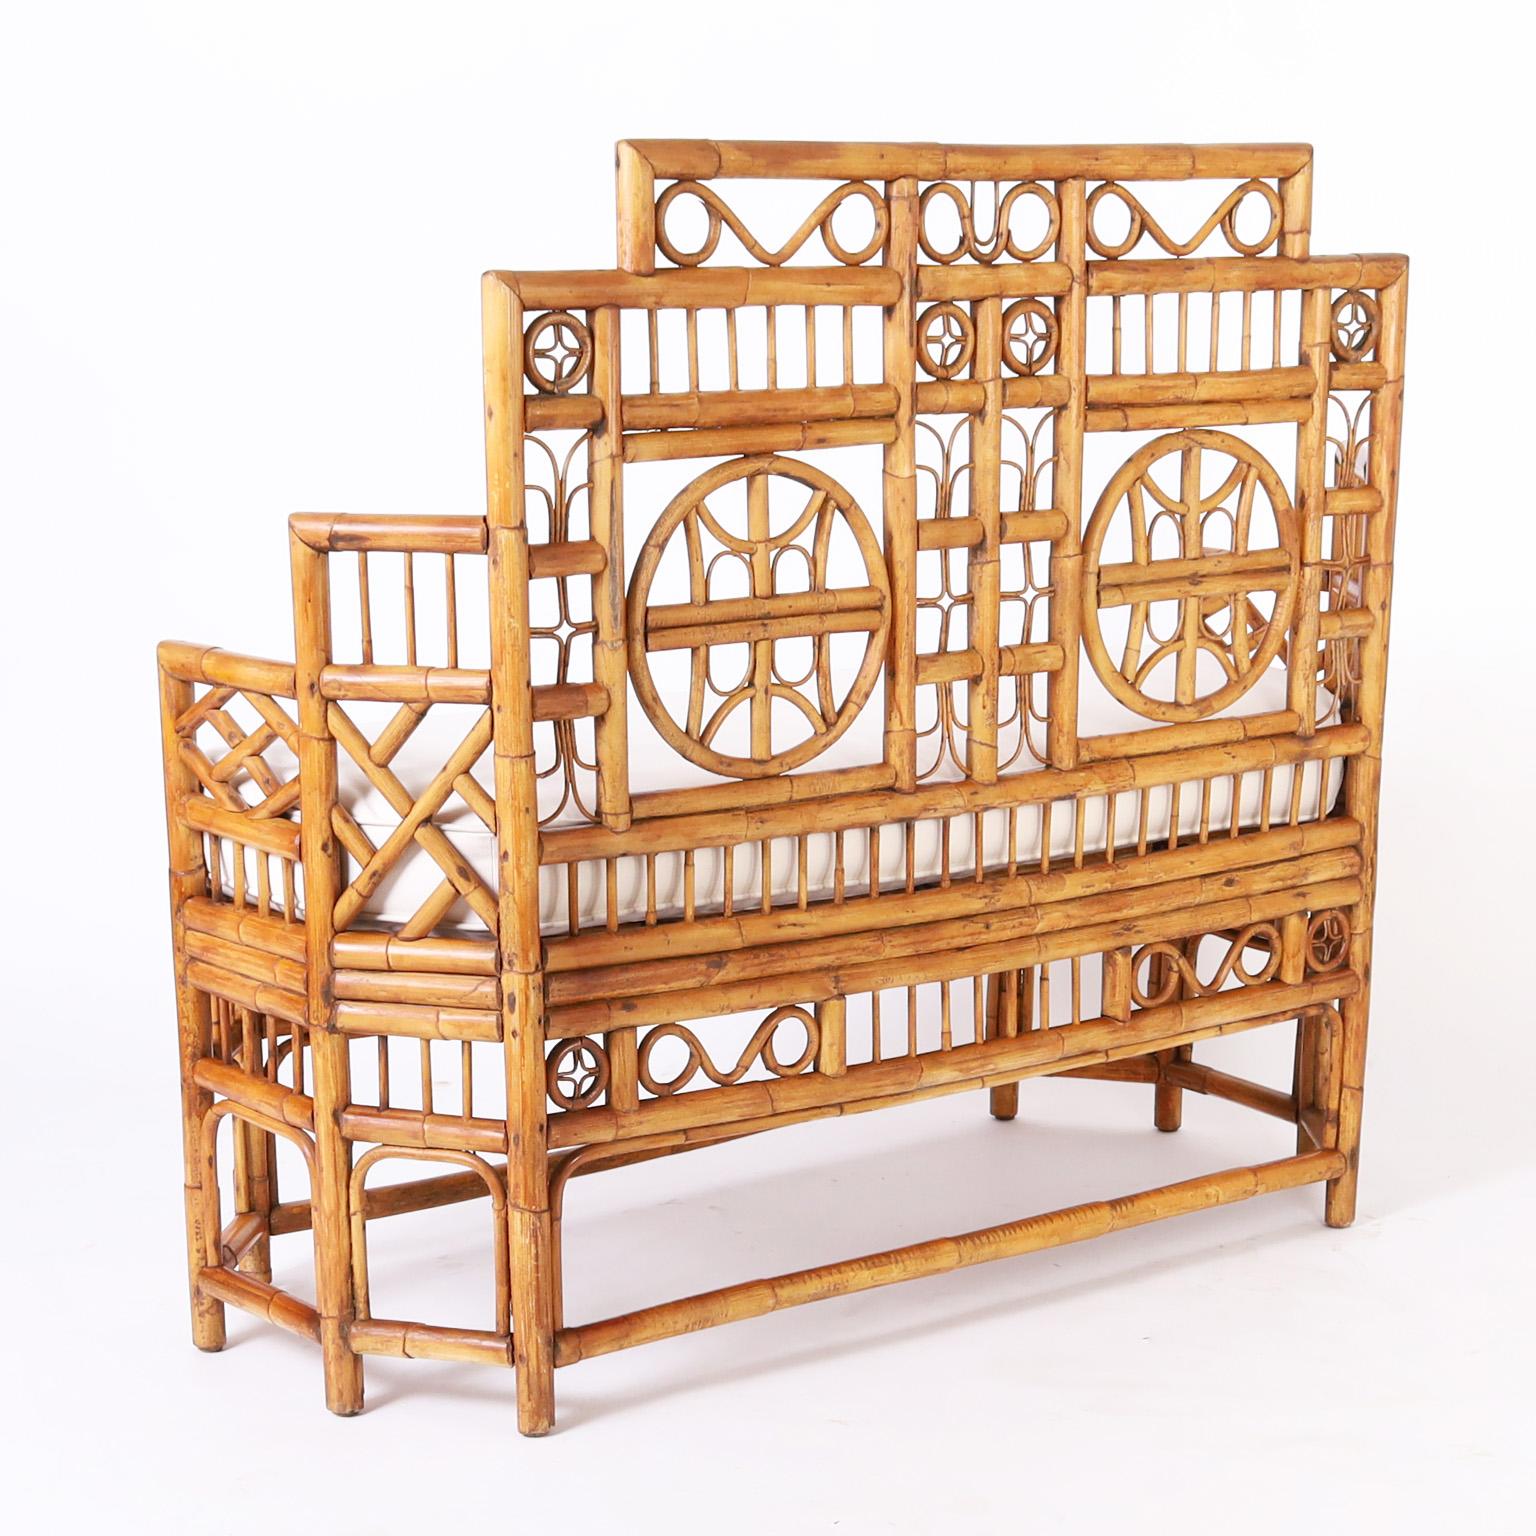 British Colonial Brighton Pavilion Style Bamboo Love Seat or Settee